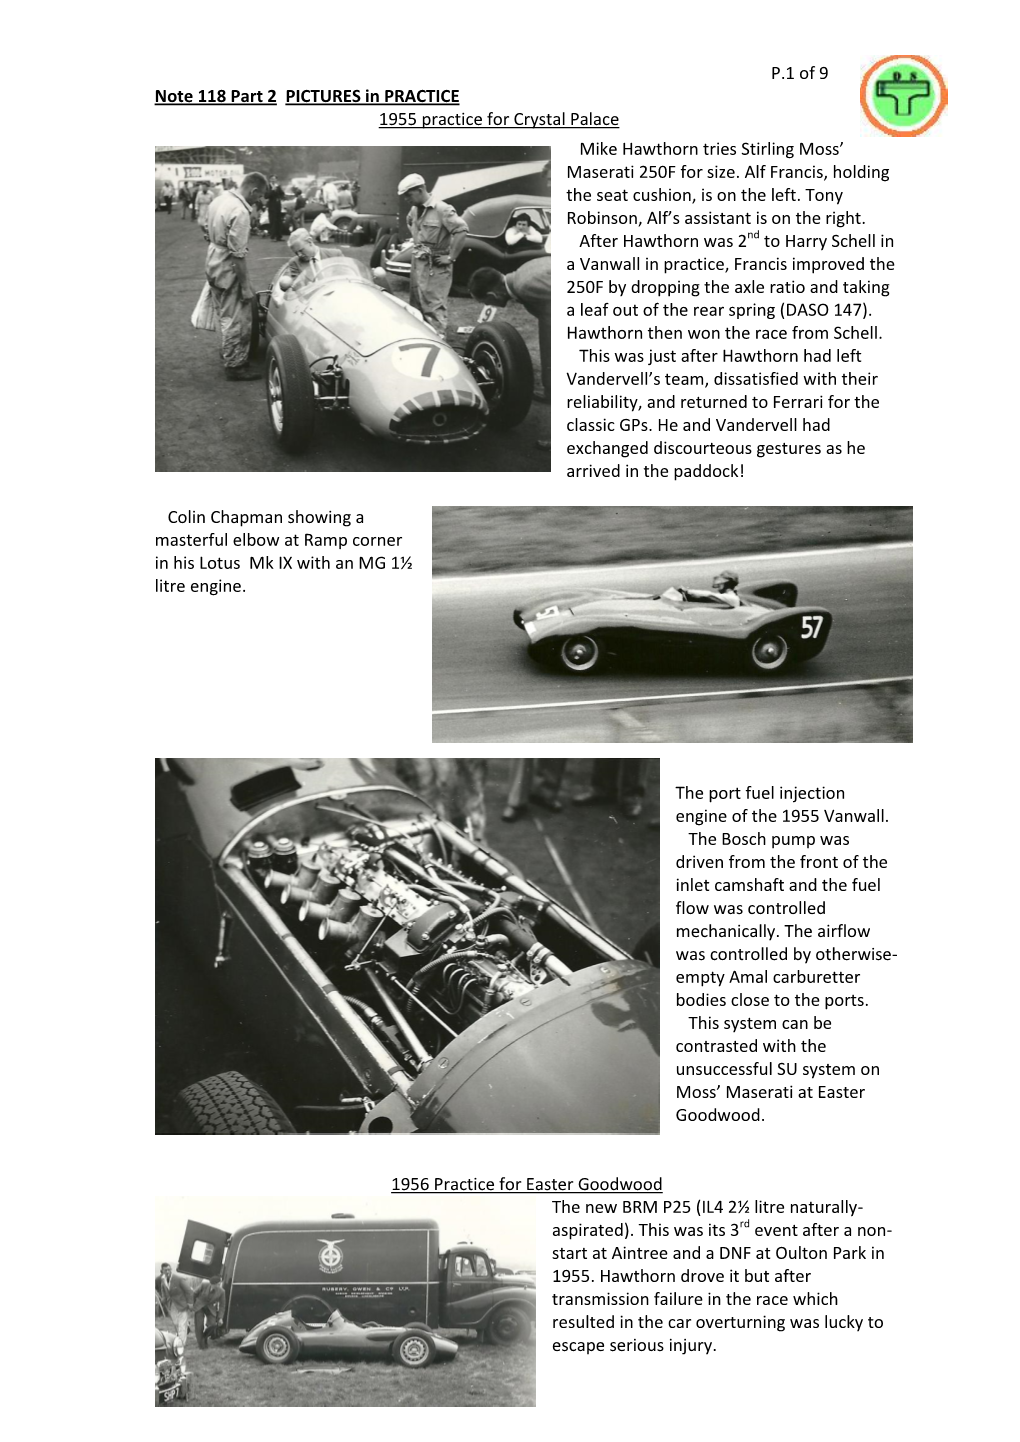 P.1 of 9 Note 118 Part 2 PICTURES in PRACTICE 1955 Practice for Crystal Palace Mike Hawthorn Tries Stirling Moss’ Maserati 250F for Size